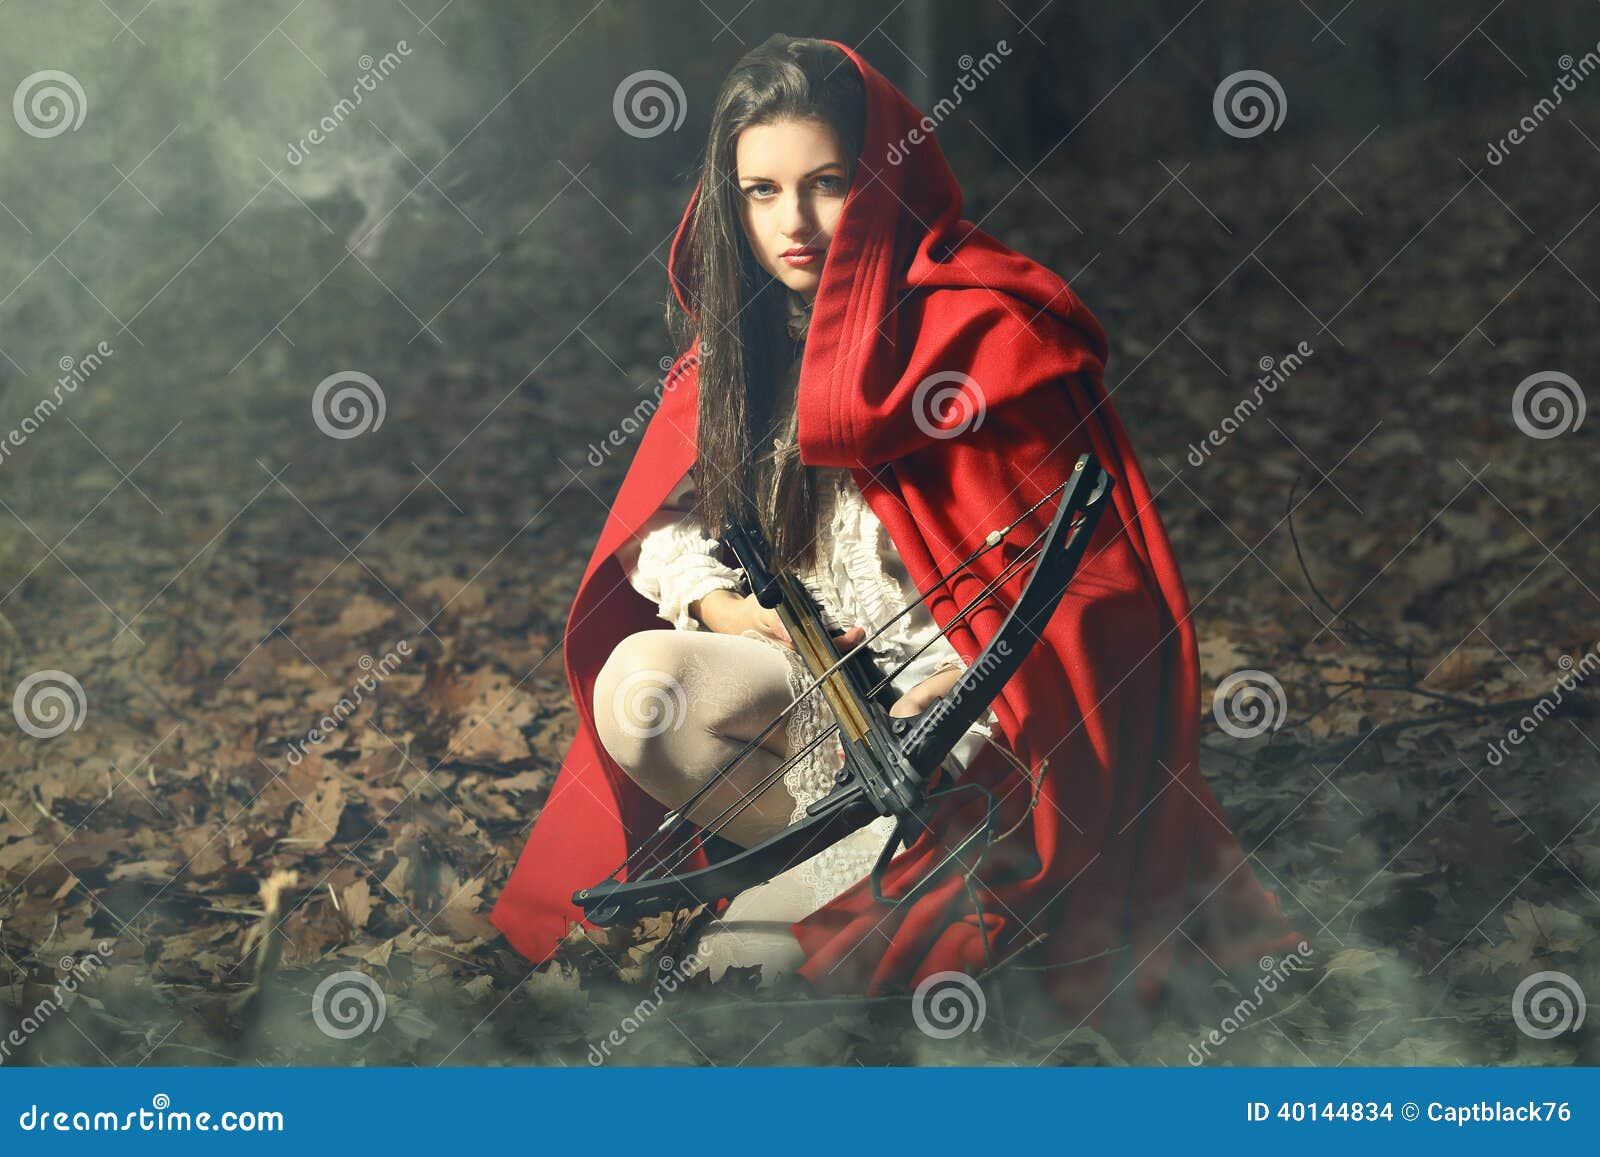 little red riding hood waiting the prey